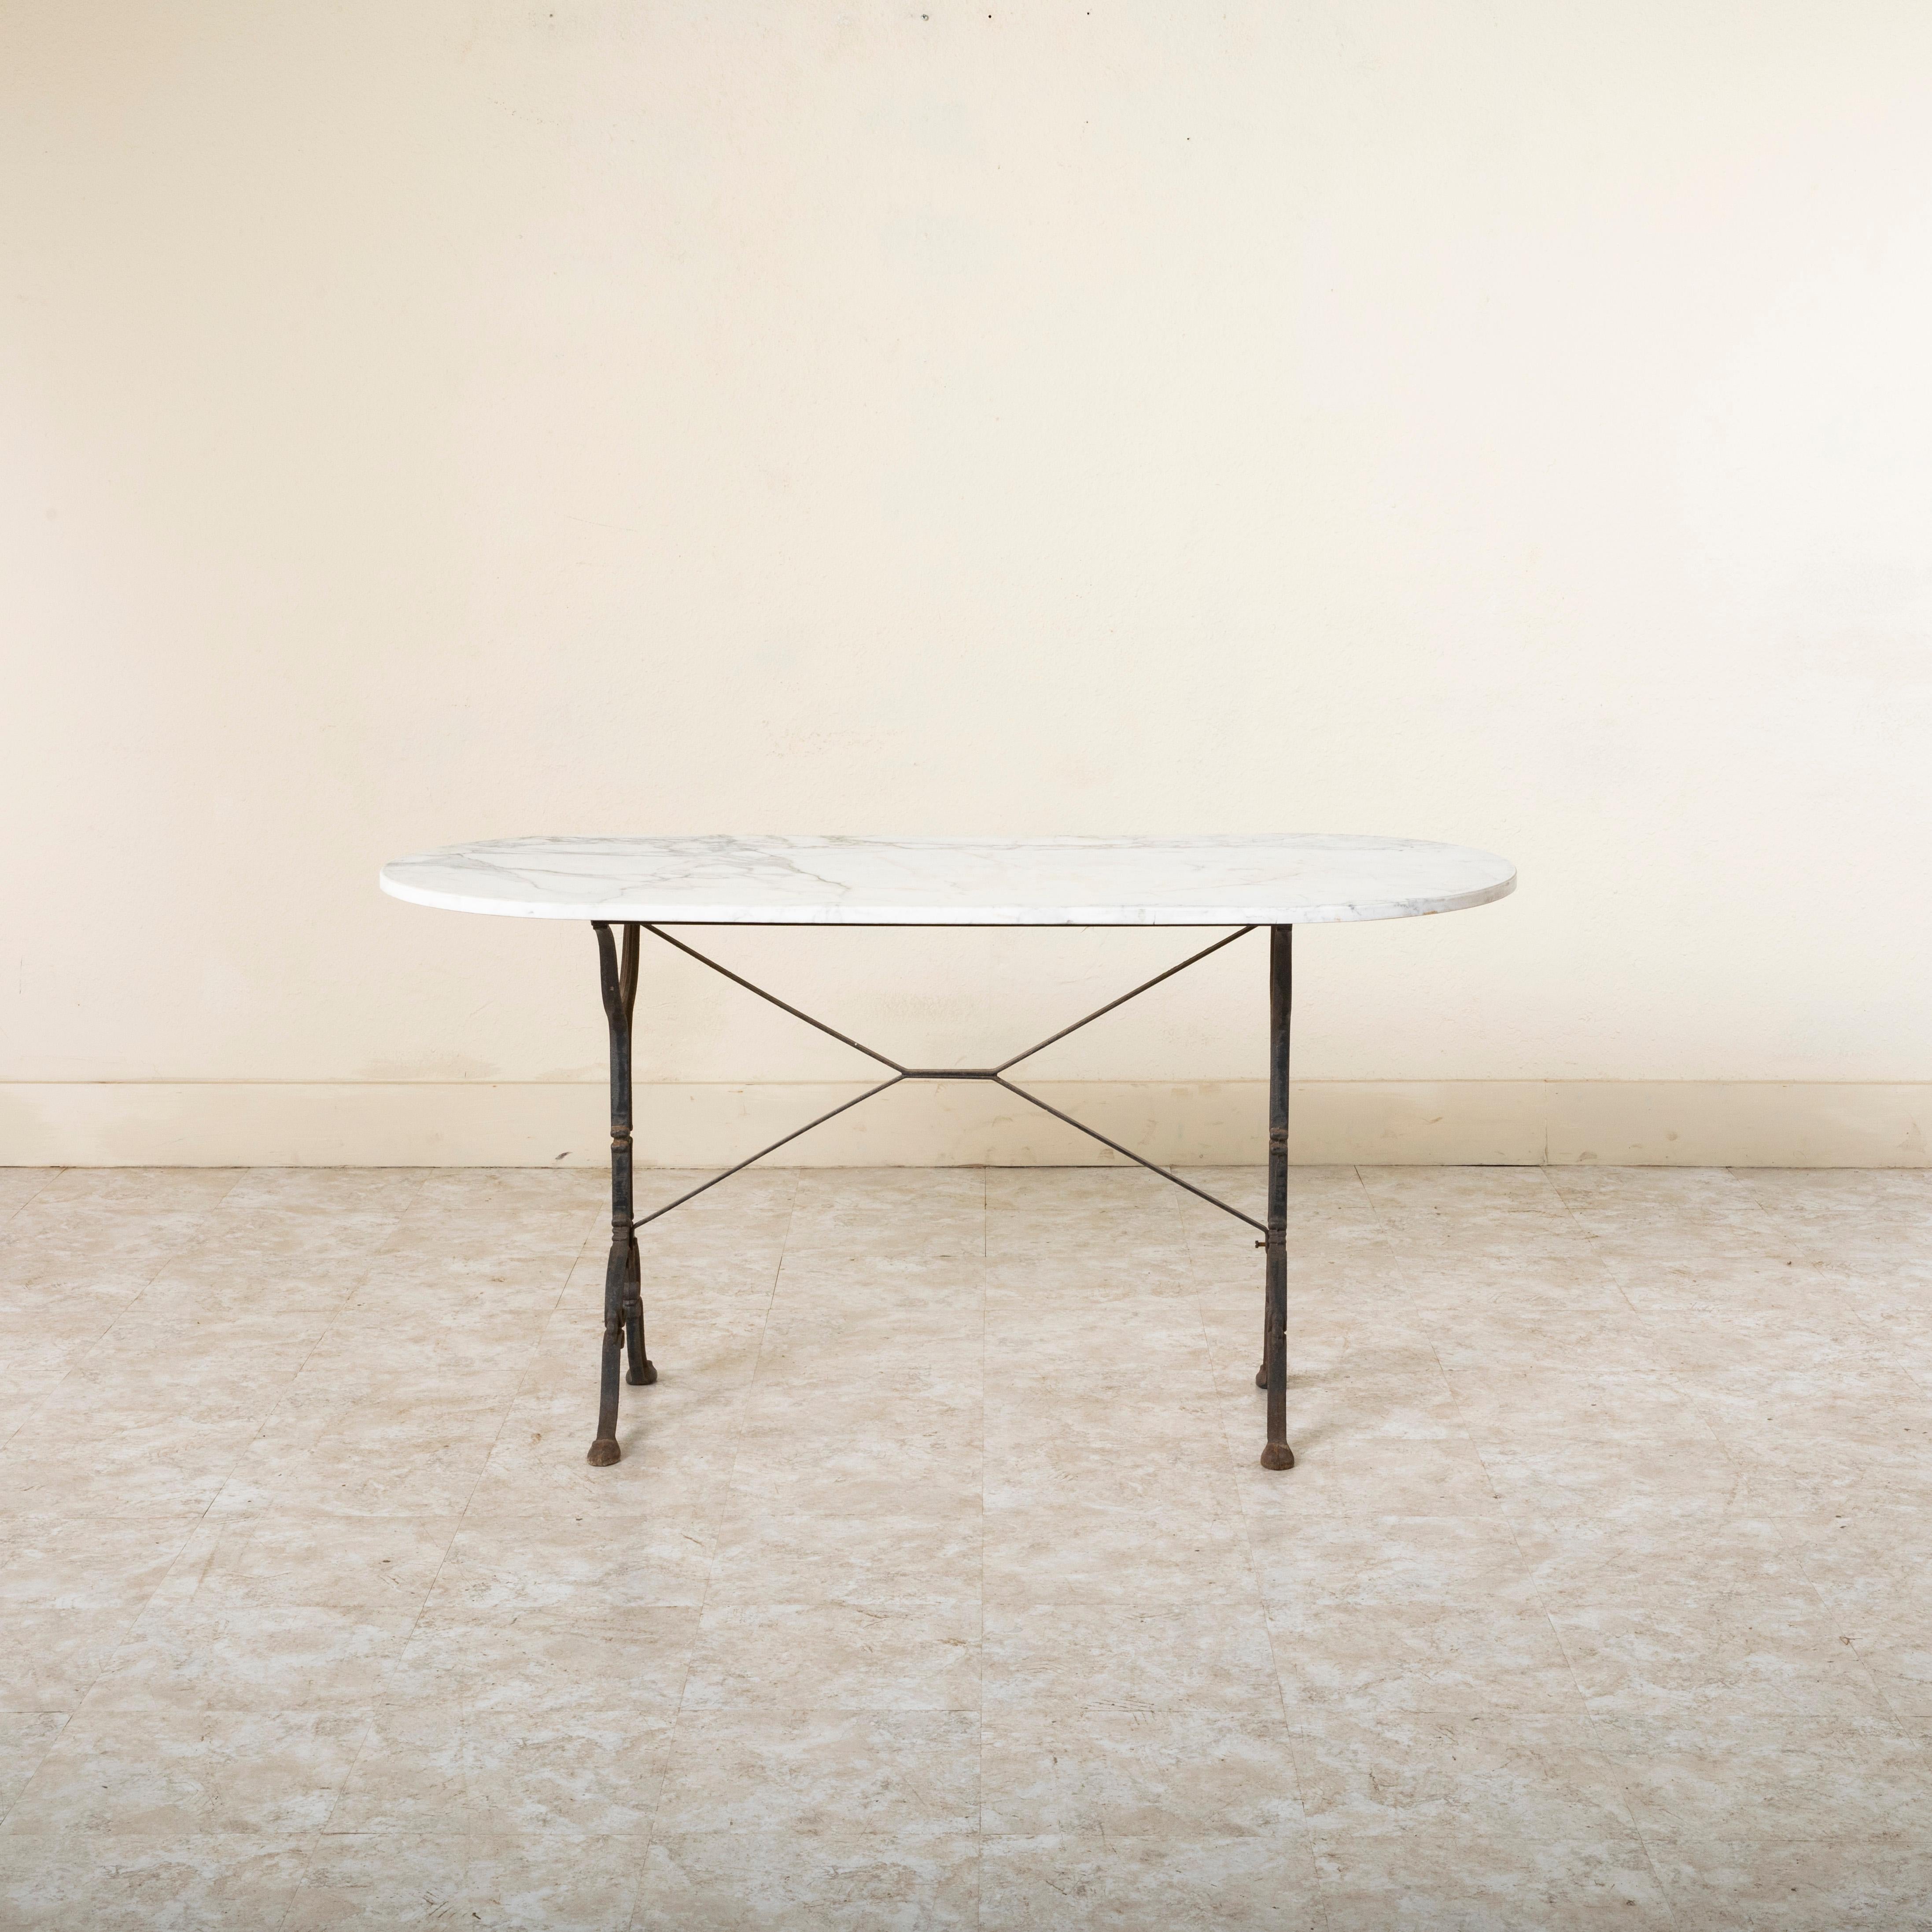 Originally used in a French brasserie in the mid twentieth century, this cast iron bistro table or cafe table features a solid white oval marble top with grey veining. Scrolled iron legs support the top and are joined by an X-stretcher that provides